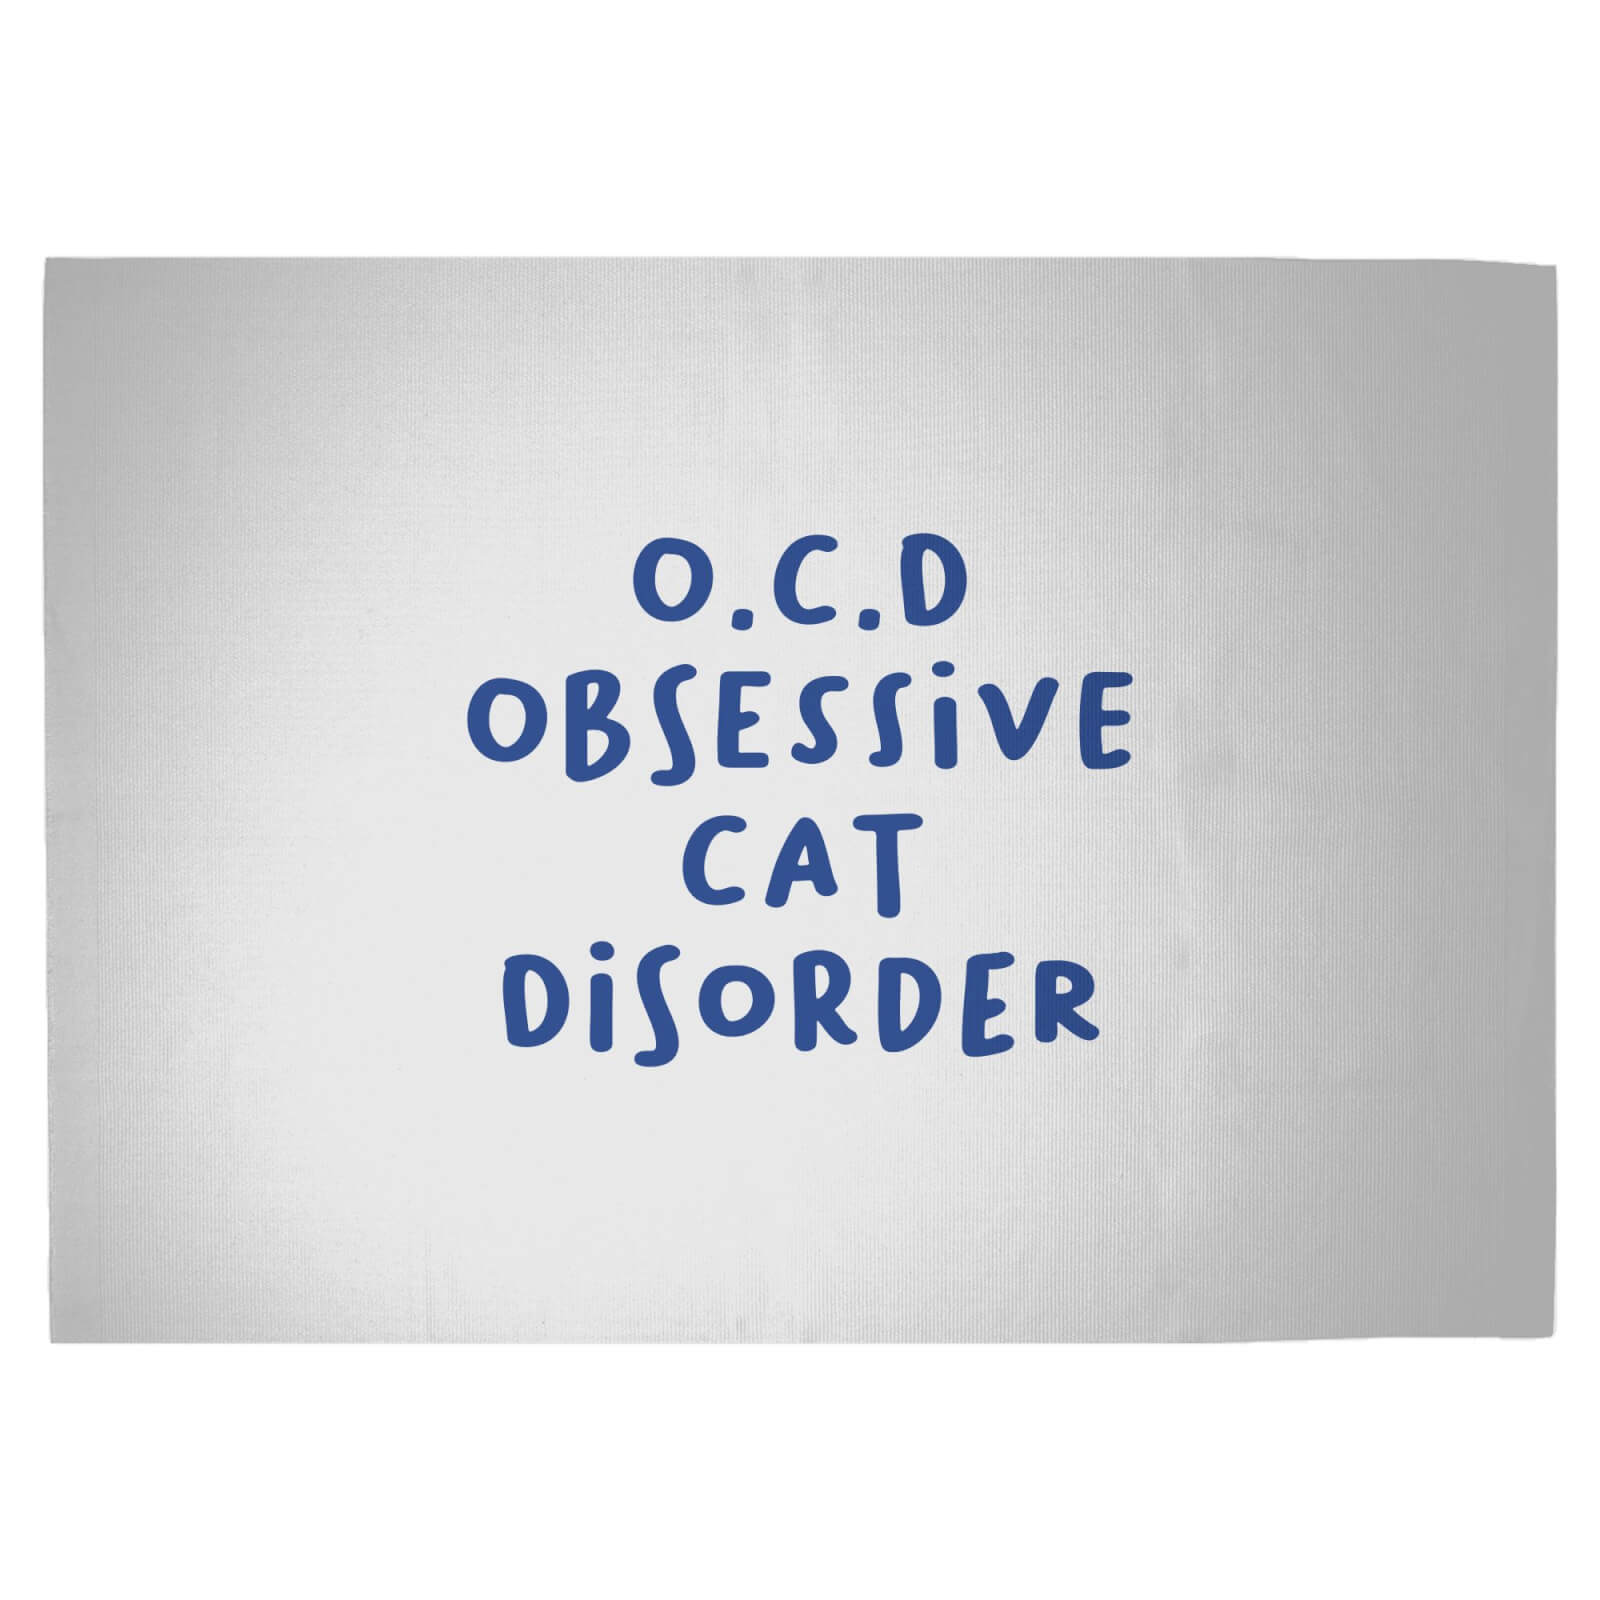 O.C.D Obsessive Cat Disorder Woven Rug - Large